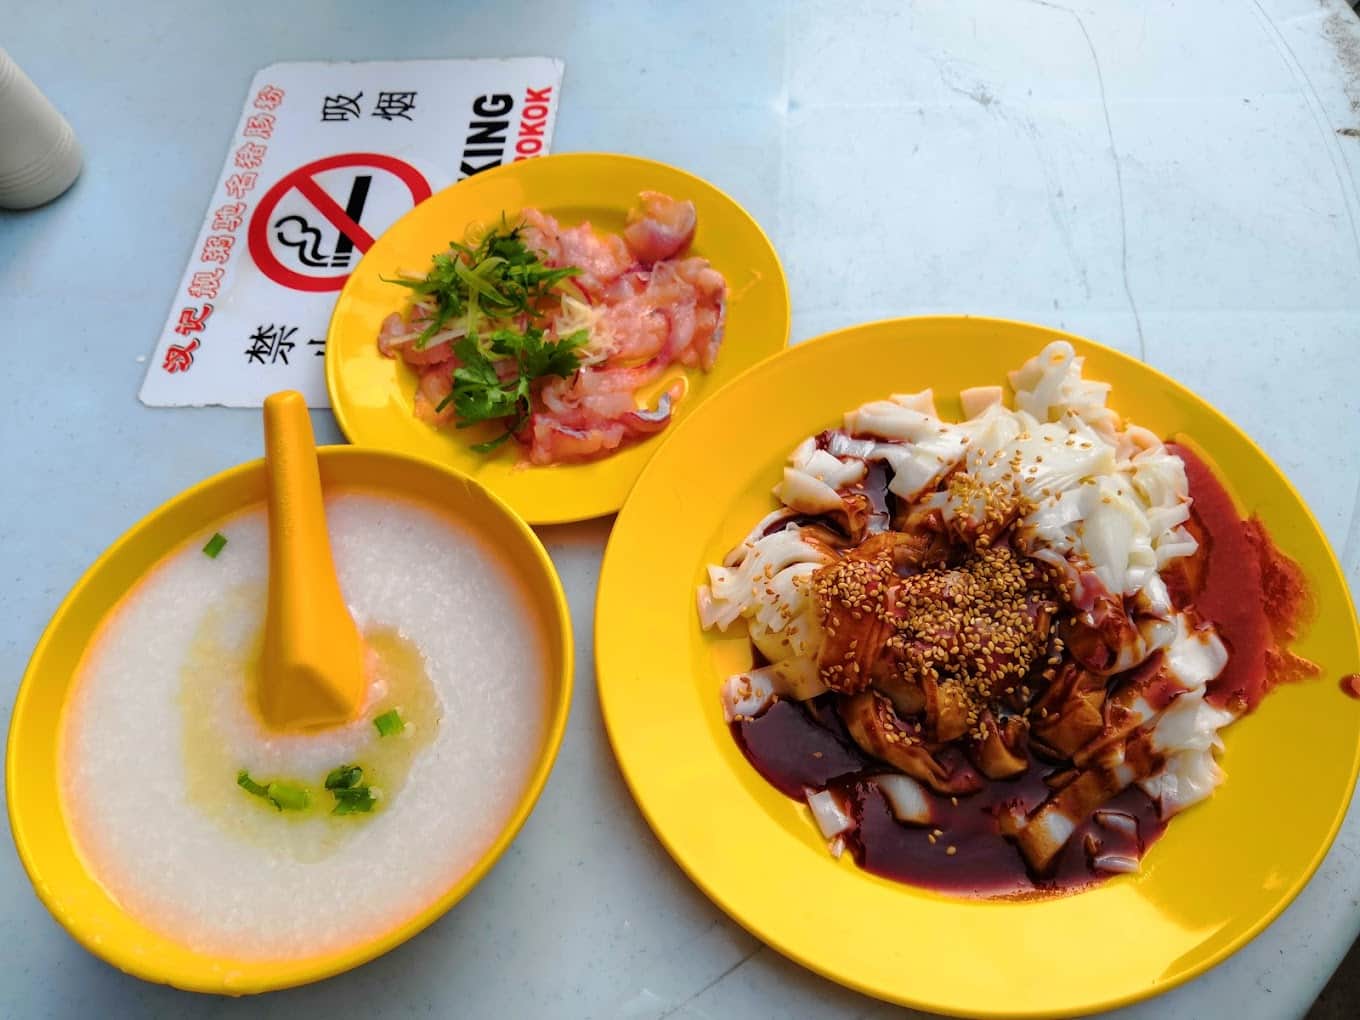 Things to do in KL - Hon Kee on Petaling Street